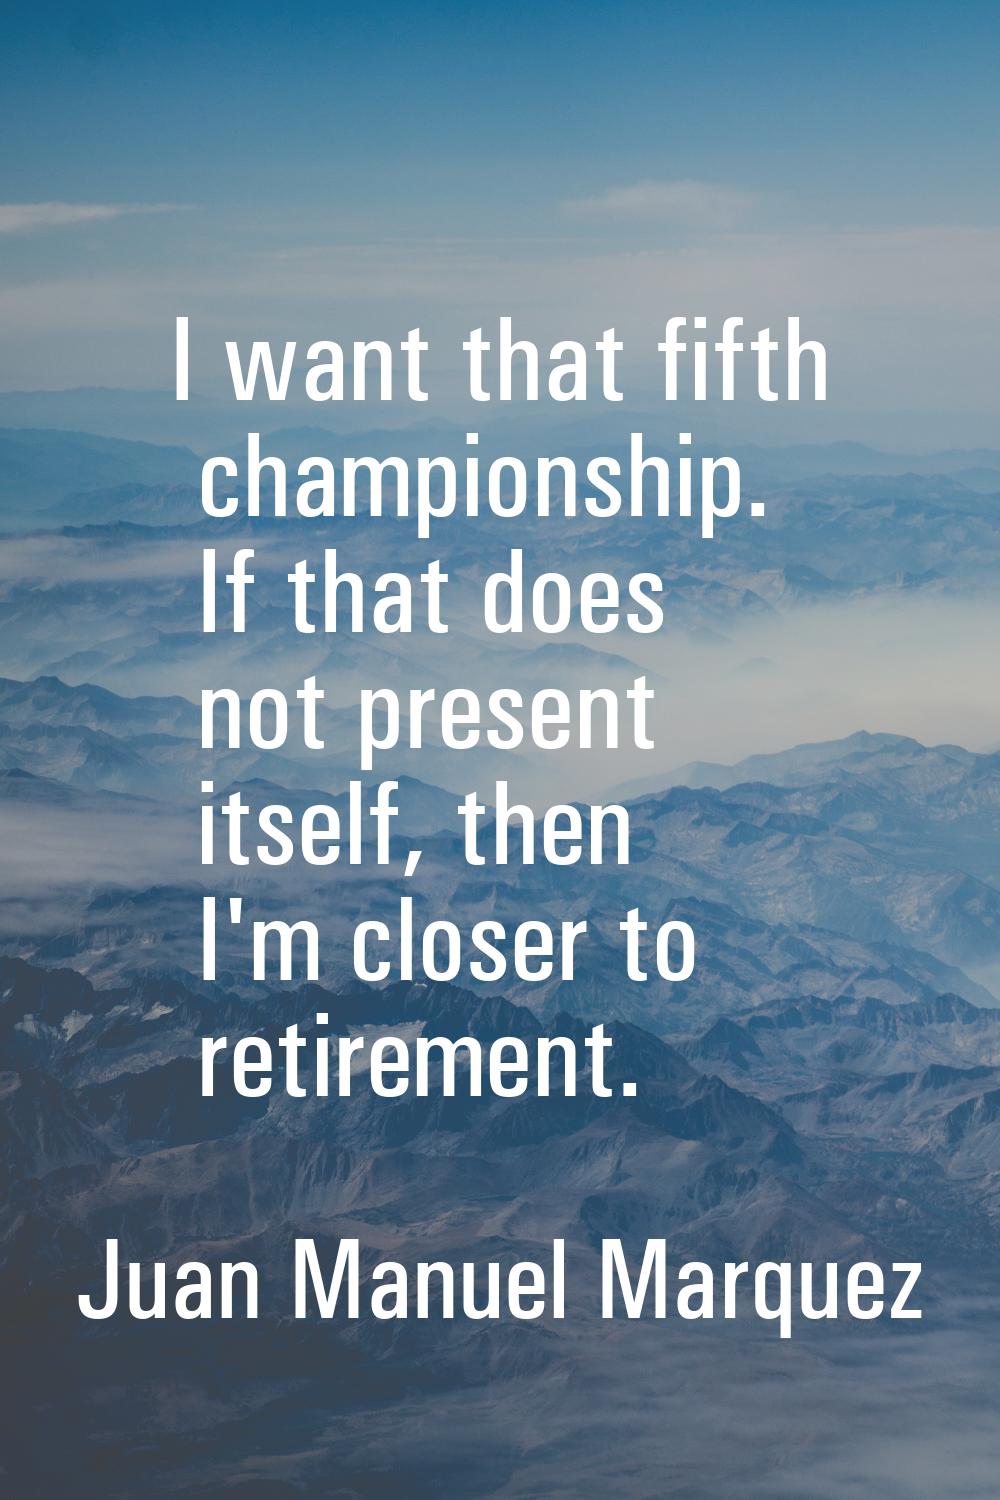 I want that fifth championship. If that does not present itself, then I'm closer to retirement.